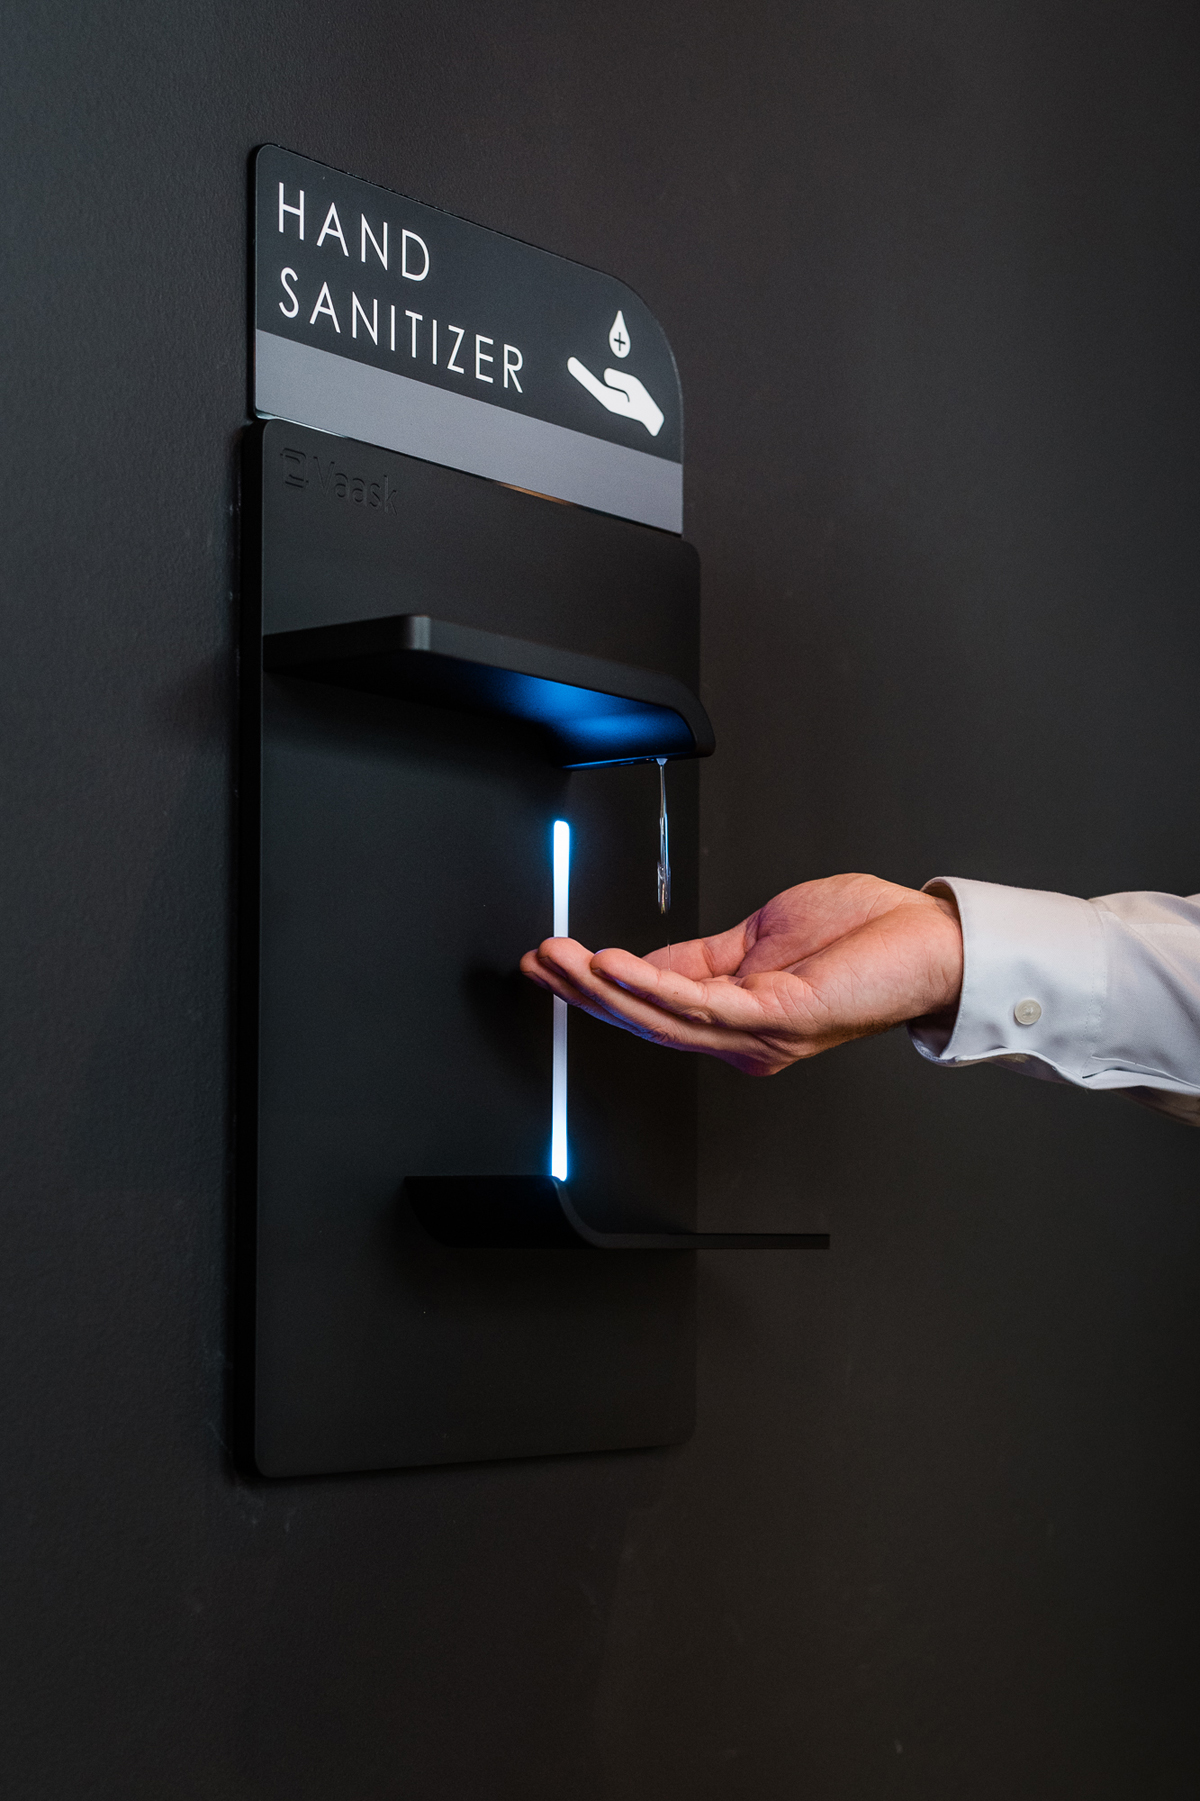  The Vaask touchless hand sanitizing fixture can be refilled with any quality sanitizer gel, and there are no locked-in supply contracts